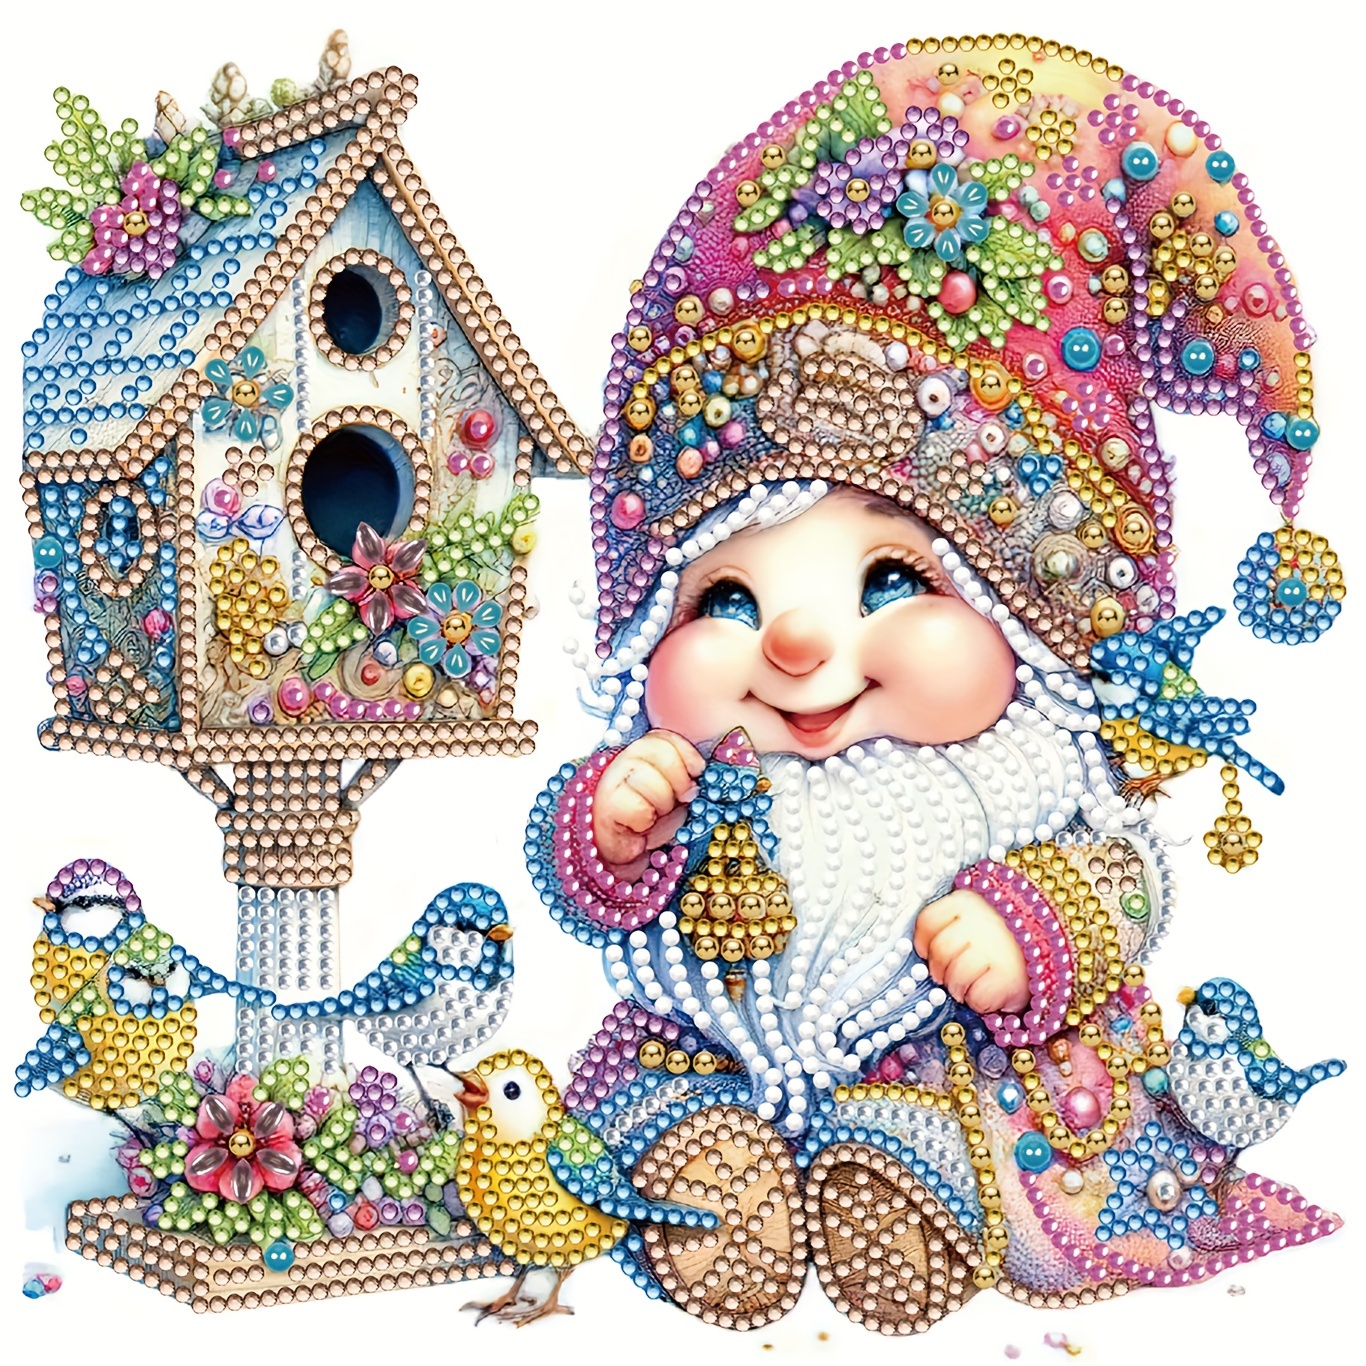 

1pc Dwarf And Birdhouse Diy Diamond Art Painting Kit, Full Diamond Irregular Diamond, Mosaic Art Craft, Suitable For Beginners, Home Wall Decoration, Gift, Without Frame, 30x30cm/11.8x11.8in